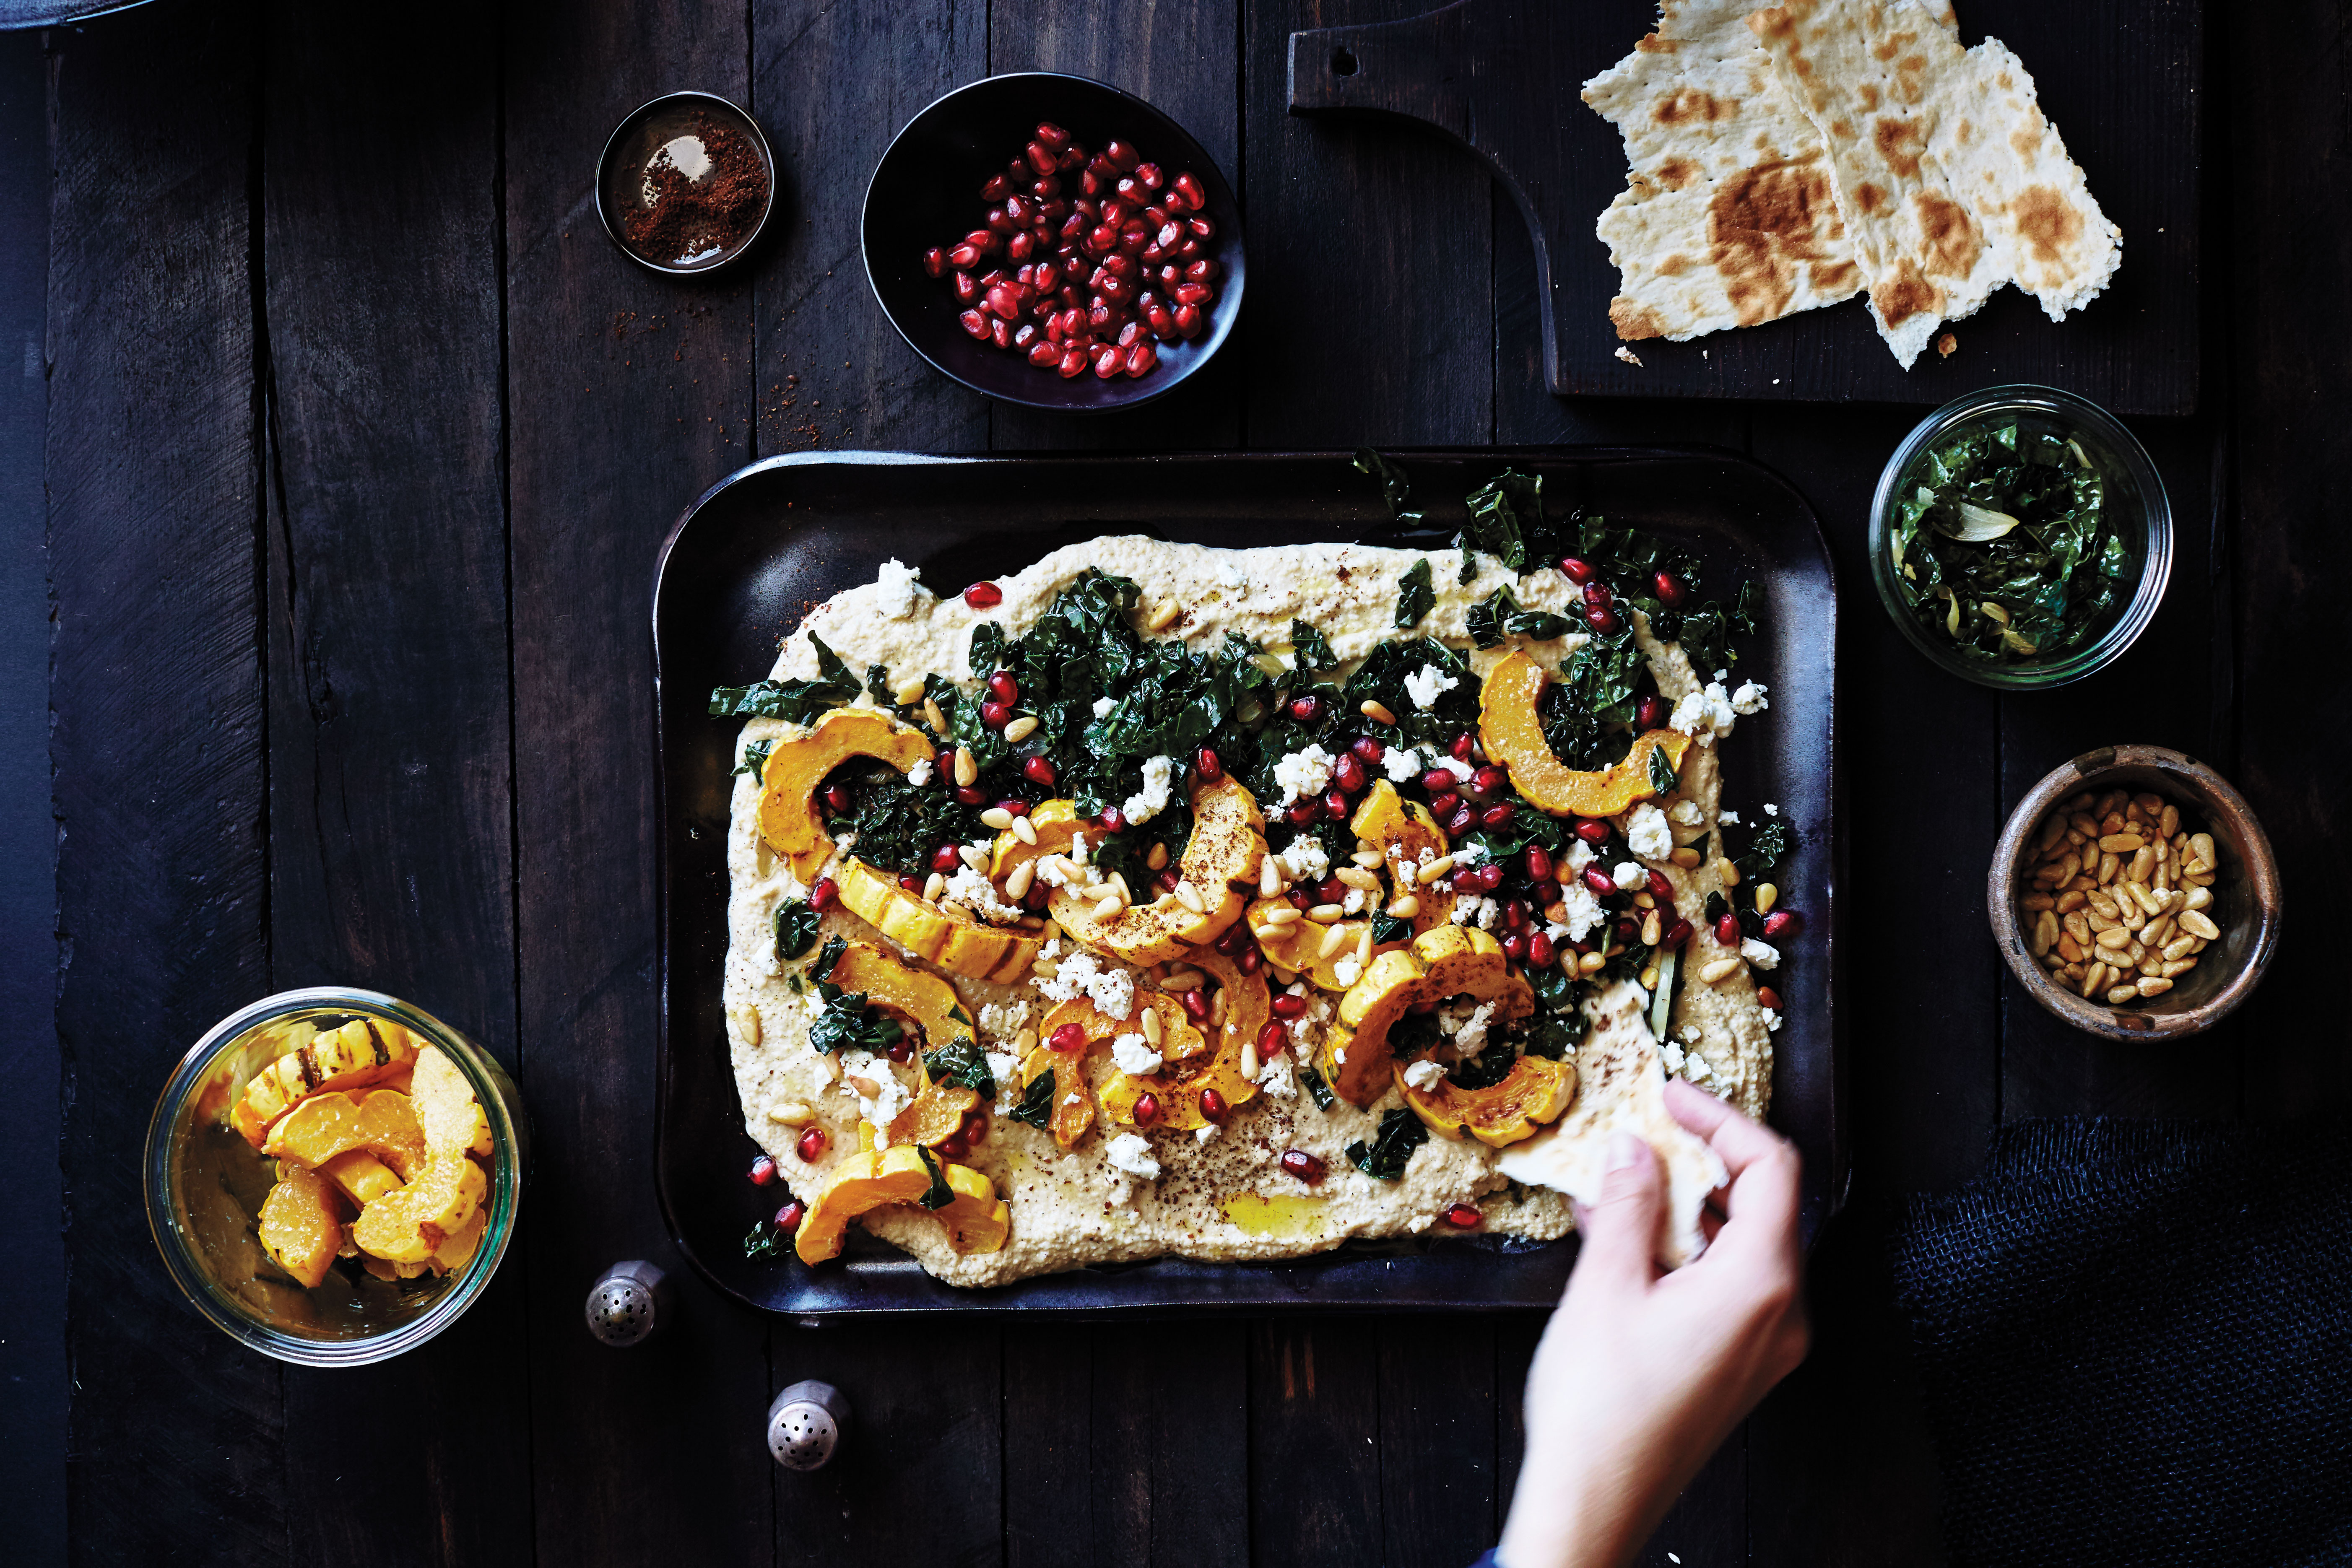 9 Twists on Hummus You Need to Try